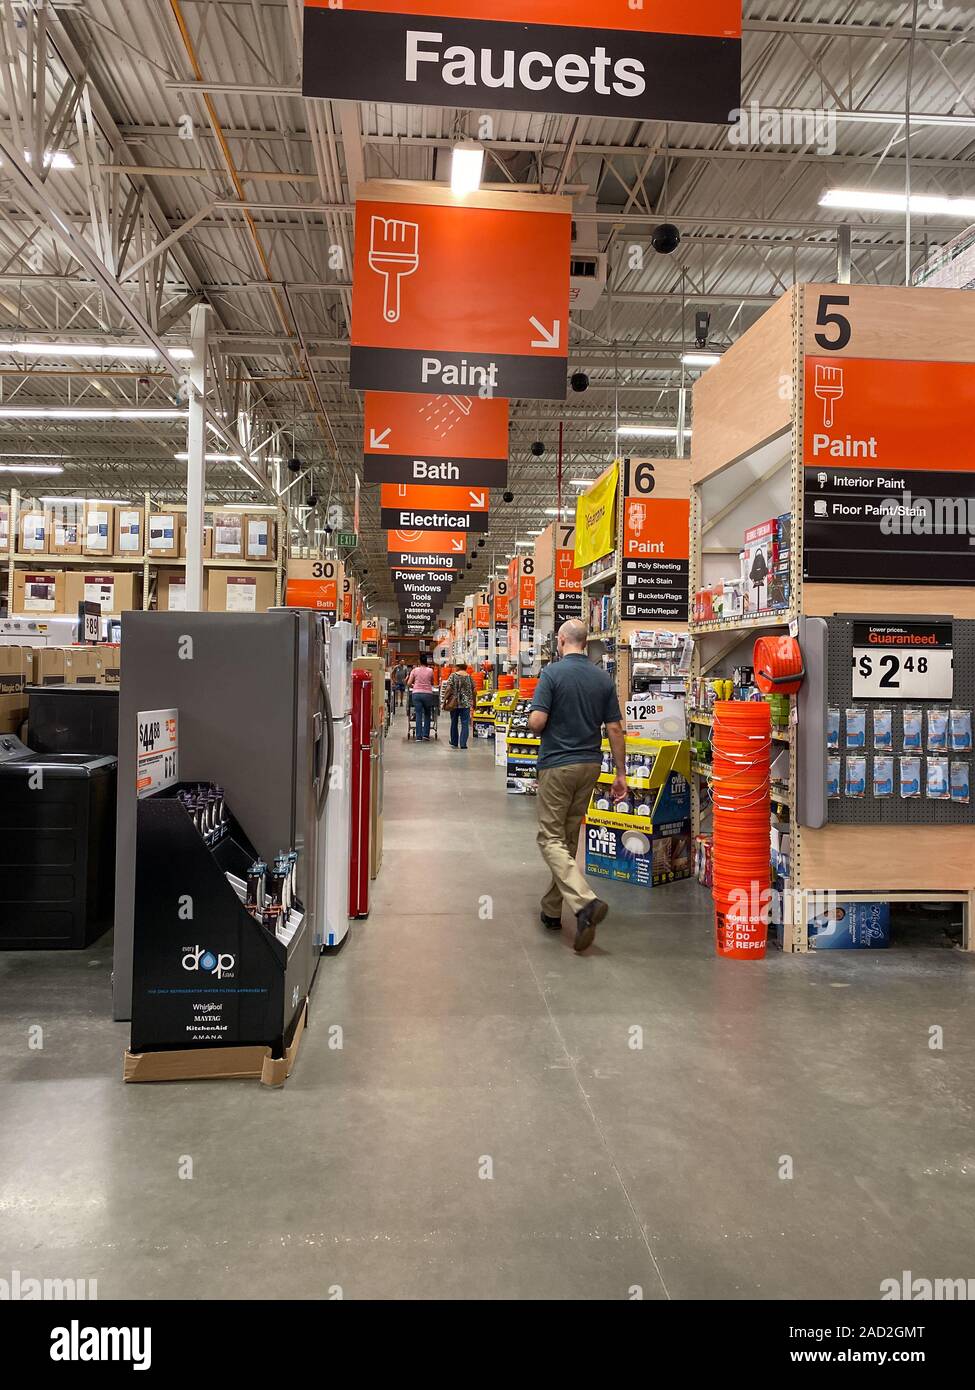 Orlando,FL/USA-11/11/19: The signs hanging from the ceiling at Home Depot home improvement store that designate what departments are in the aisle whil Stock Photo